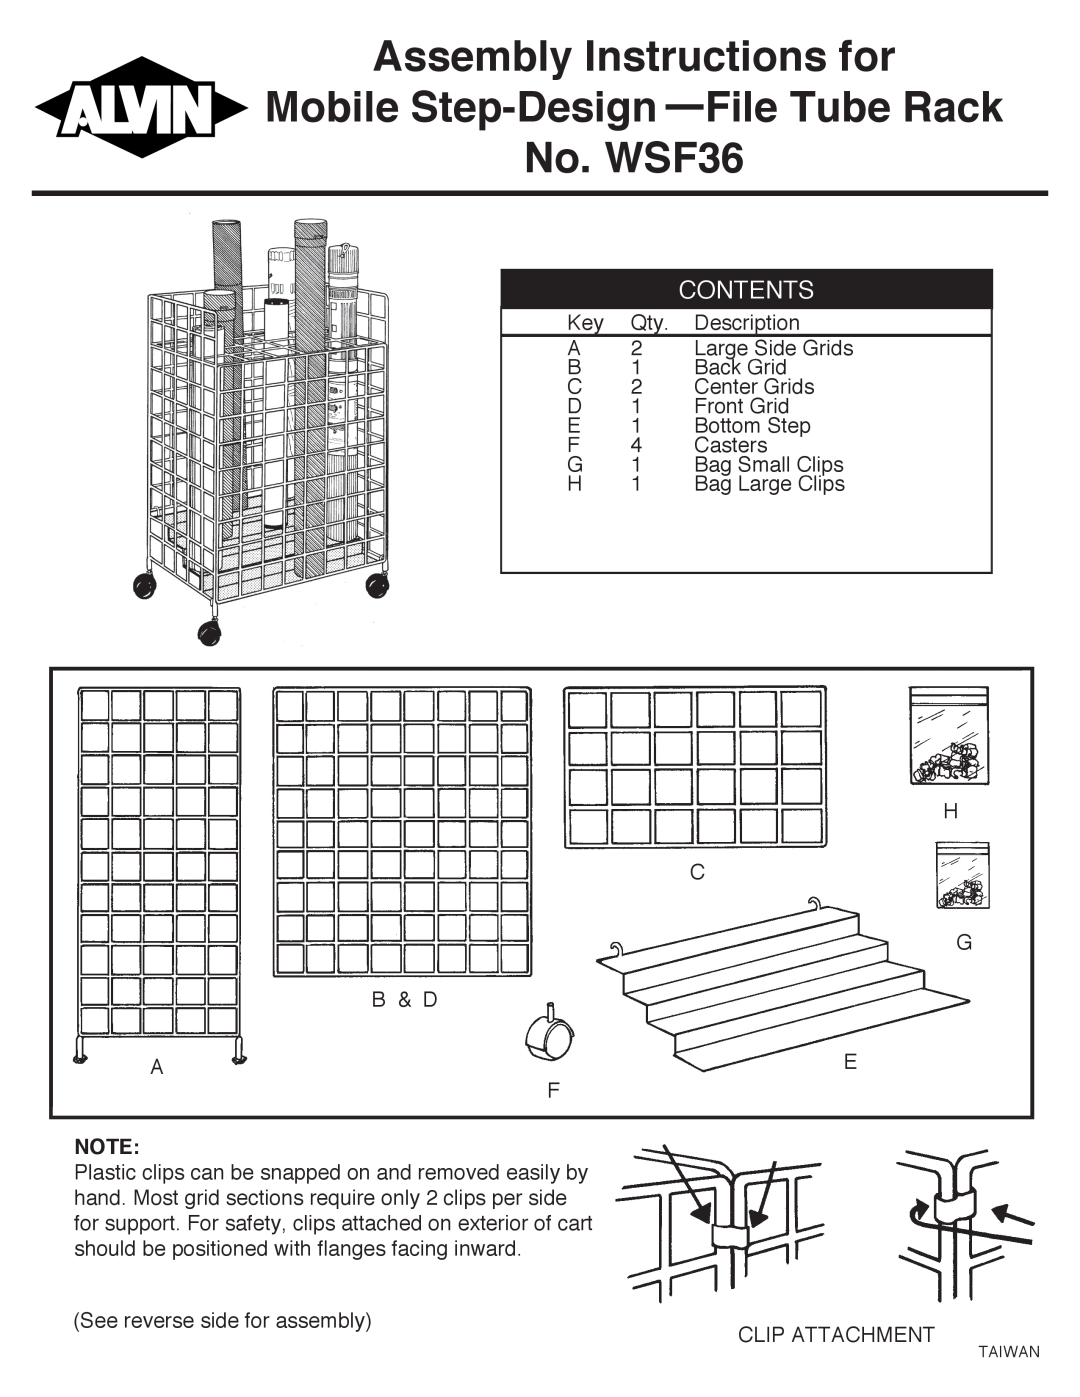 Alvin manual Assembly Instructions for, Mobile Step-DesignFile Tube Rack No. WSF36, Contents 